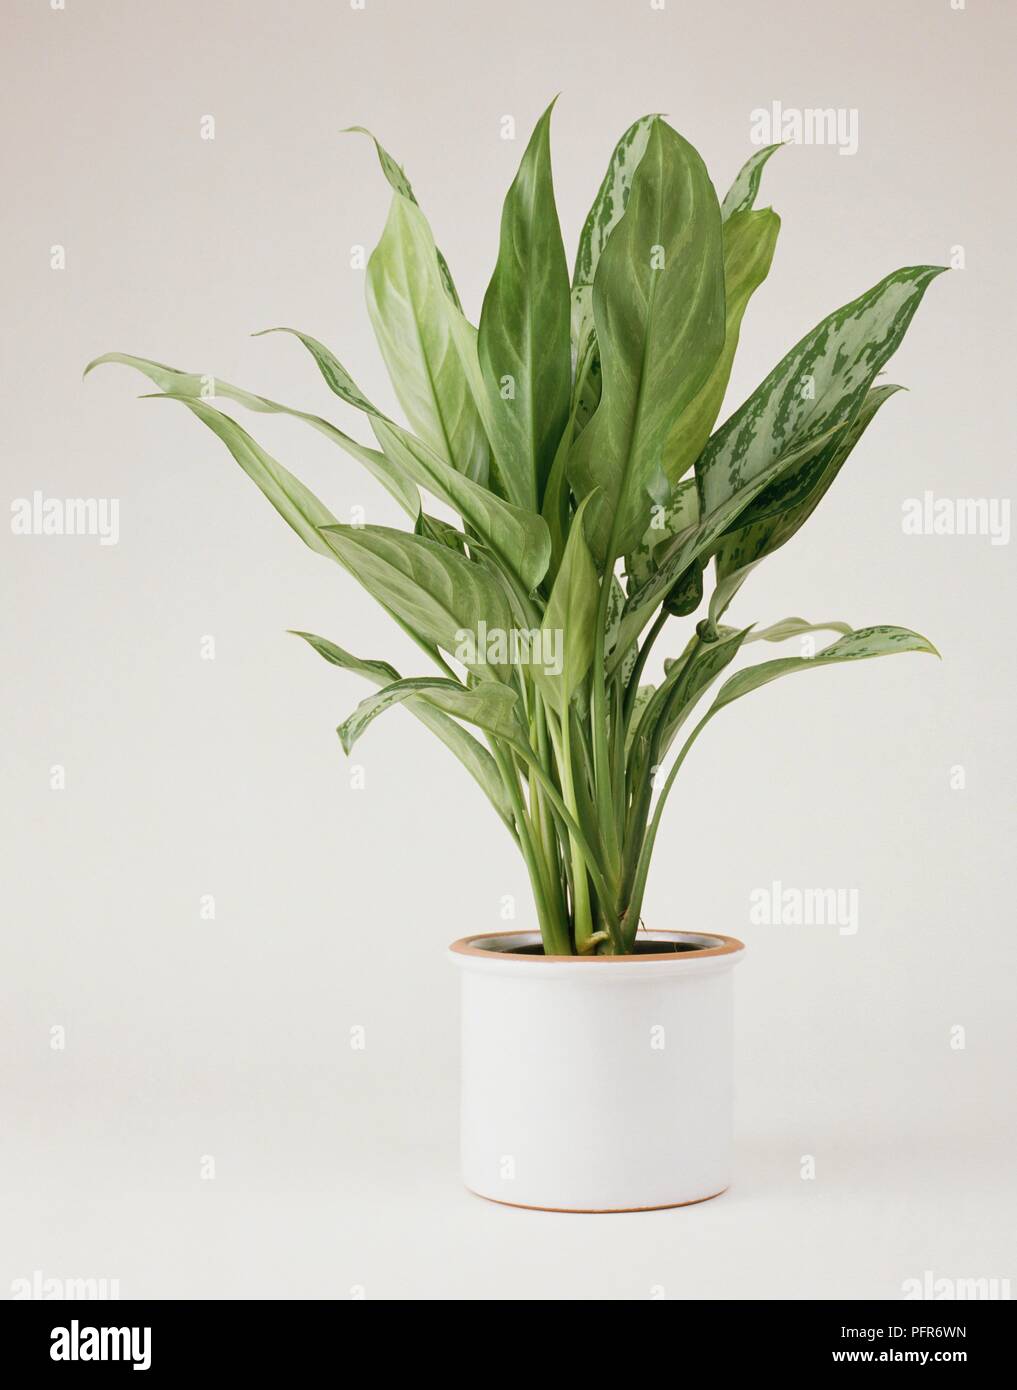 Astelia Silver Spear with large, upright green leaves in white container Stock Photo